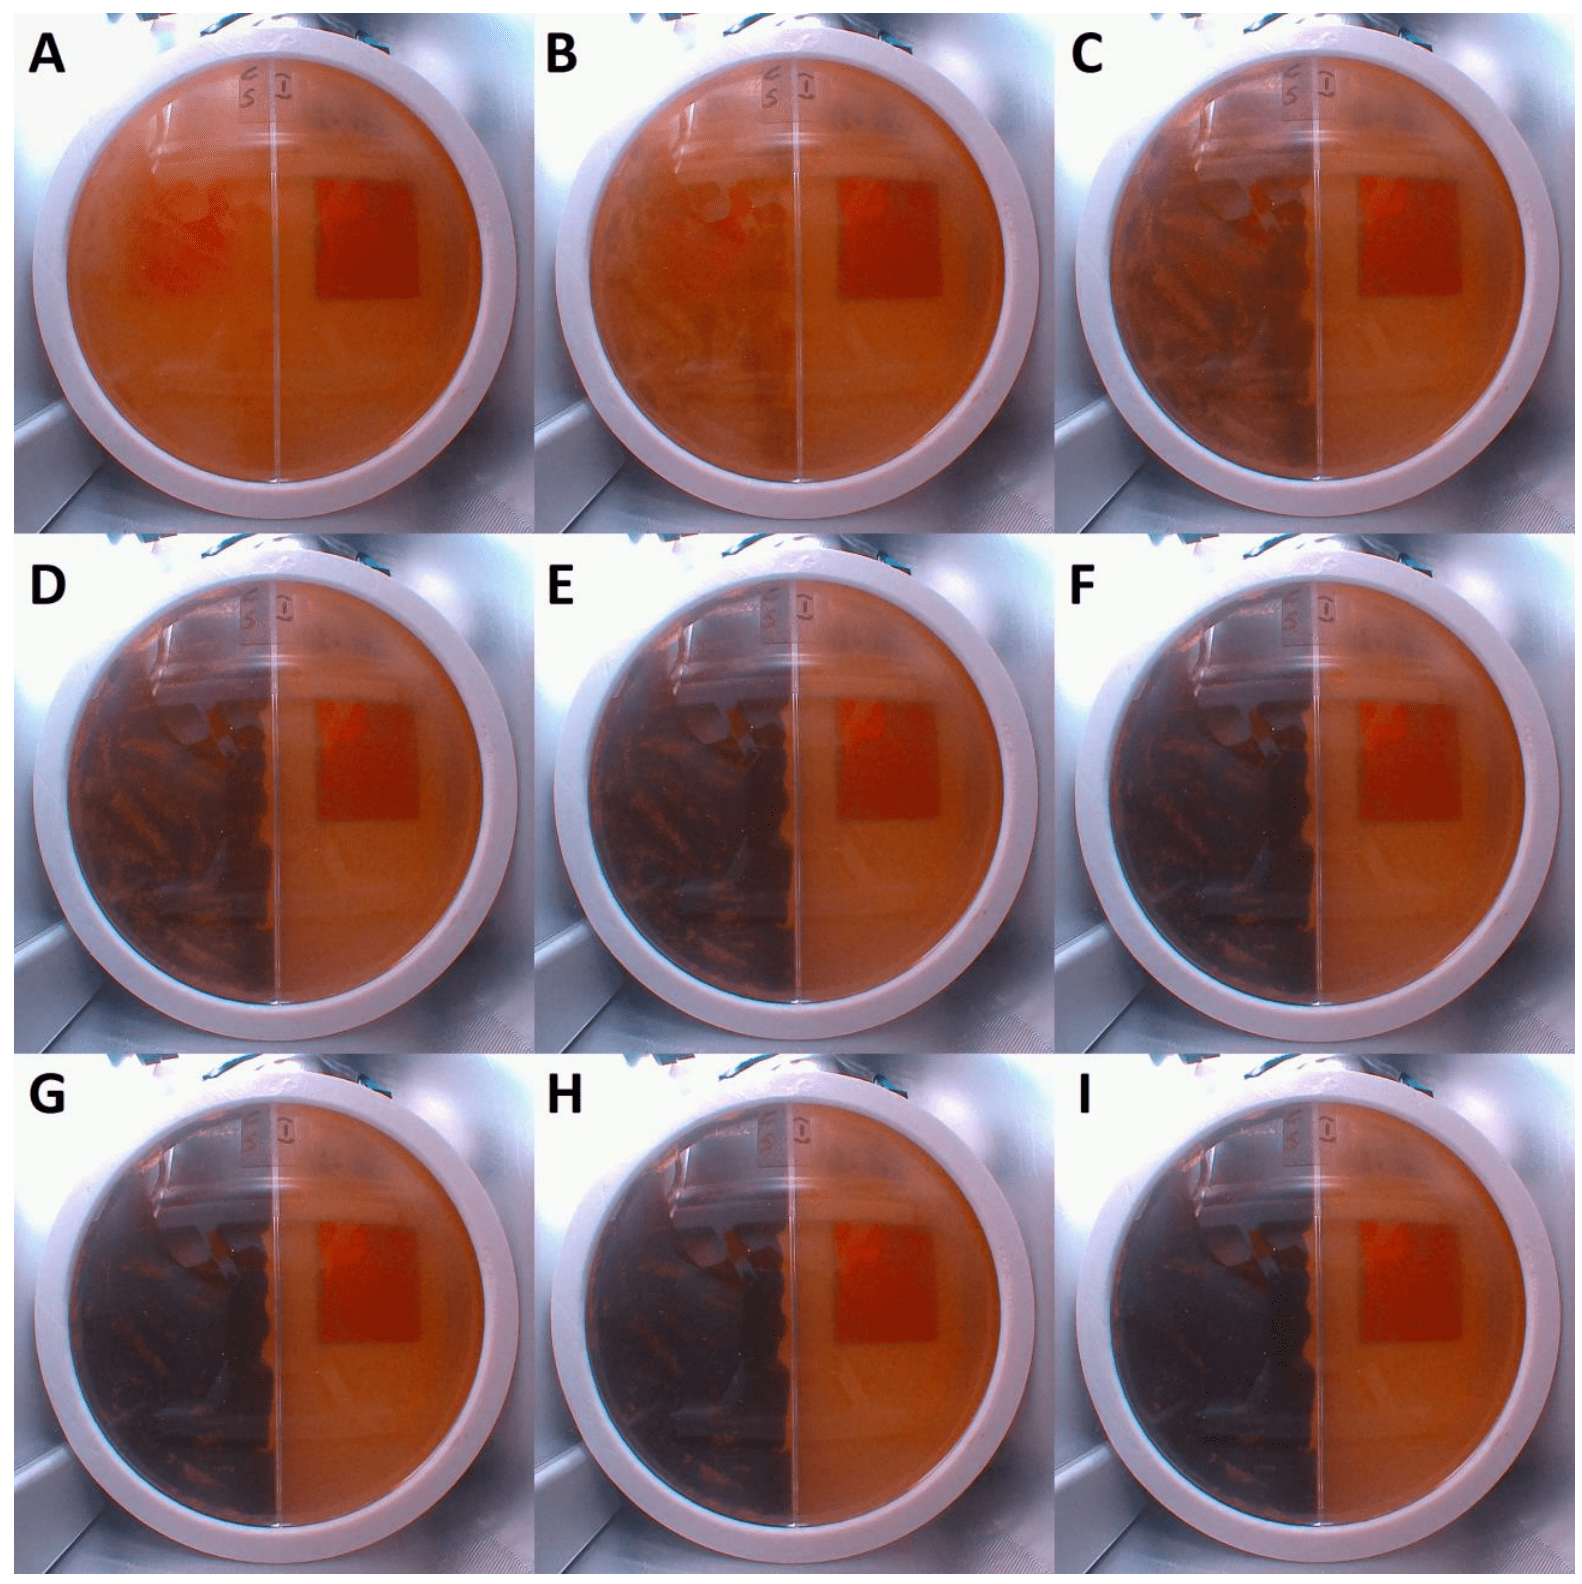 Fungal growth (as seen on the left side of the petri dish) as observed during the first 48 hours of the experiment.  (Image: G. K. Shunk et al., 2020)